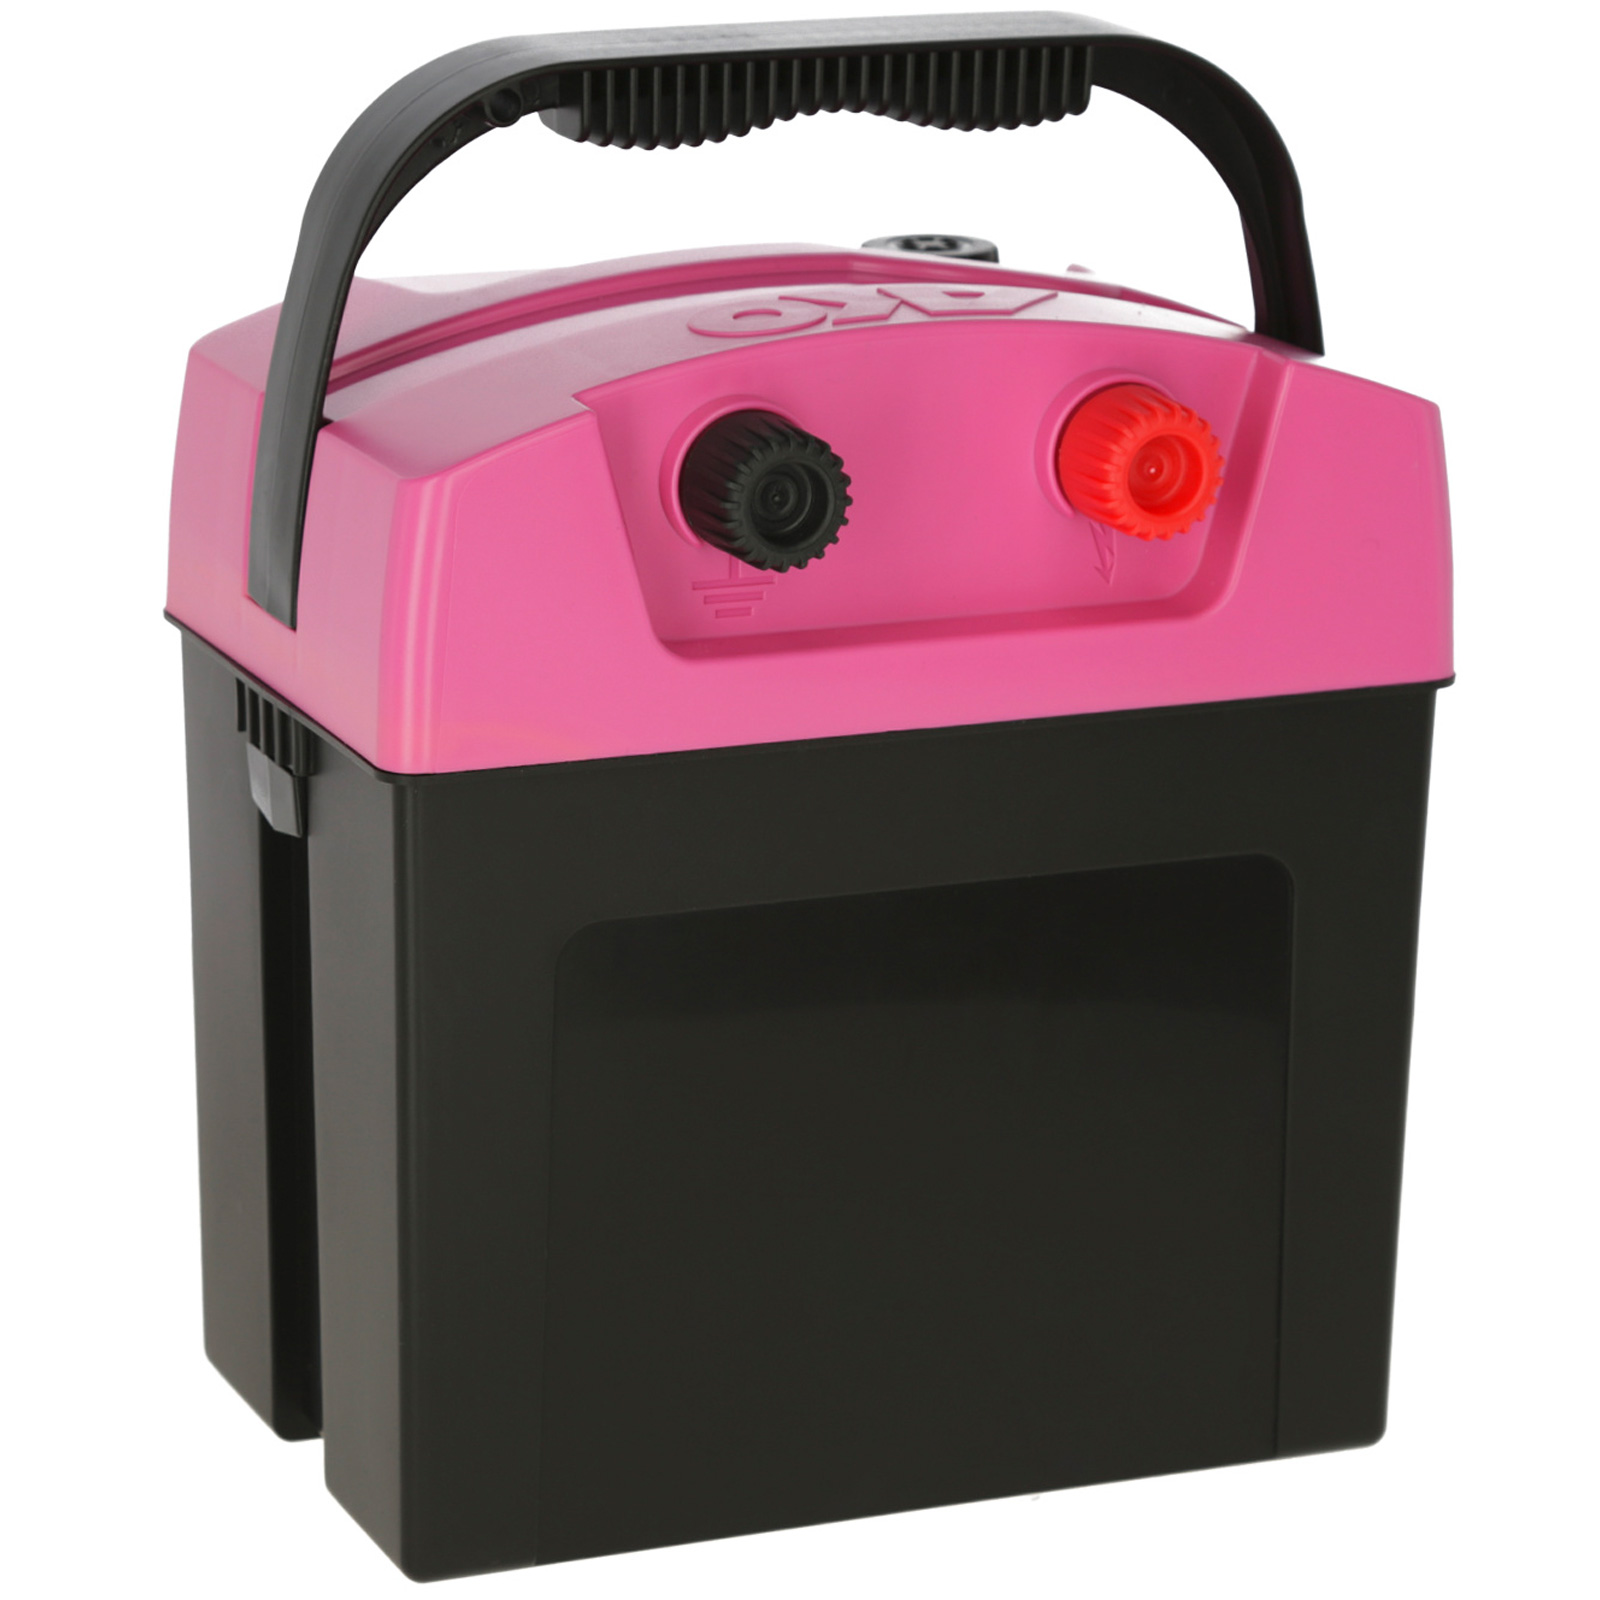 AKO Compact Power B180 Electric fence energiser 9V, 0.26 Joule, pink